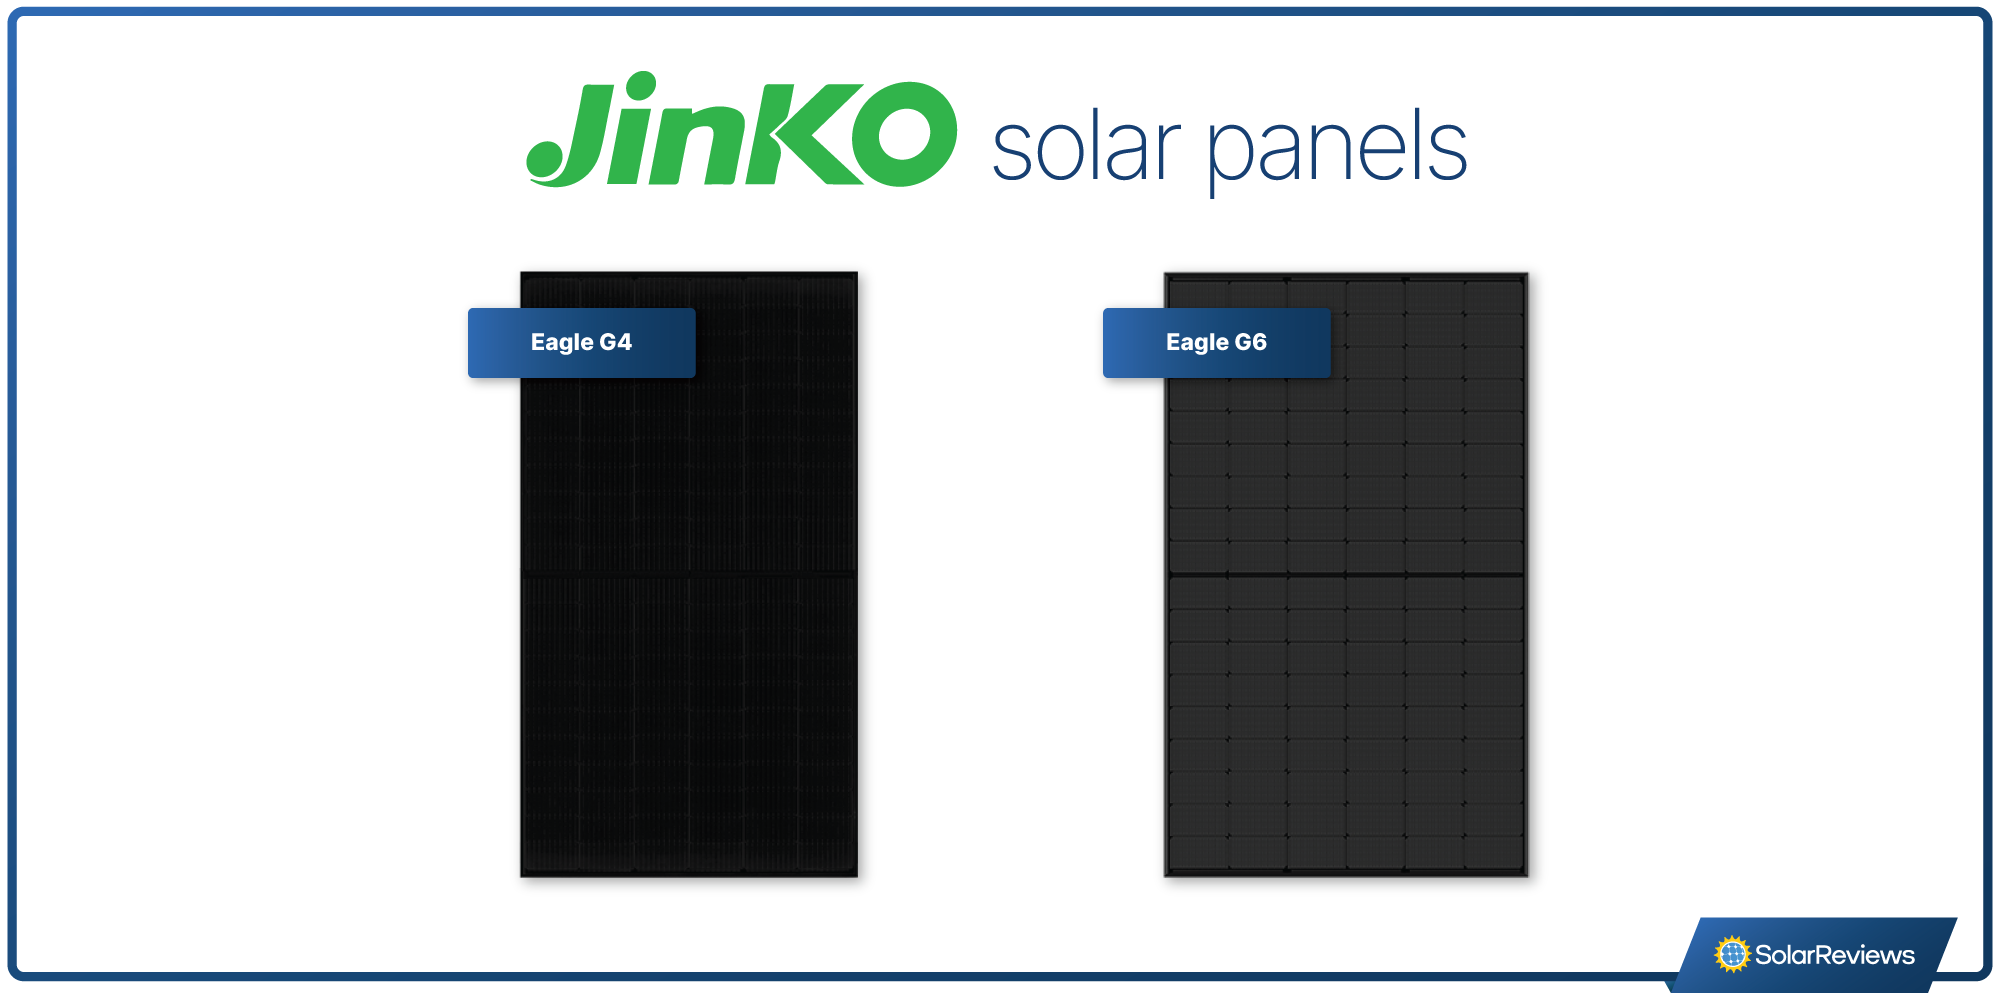 Jinko Solar's Eagle G4 and Eagle G6 panels side by side